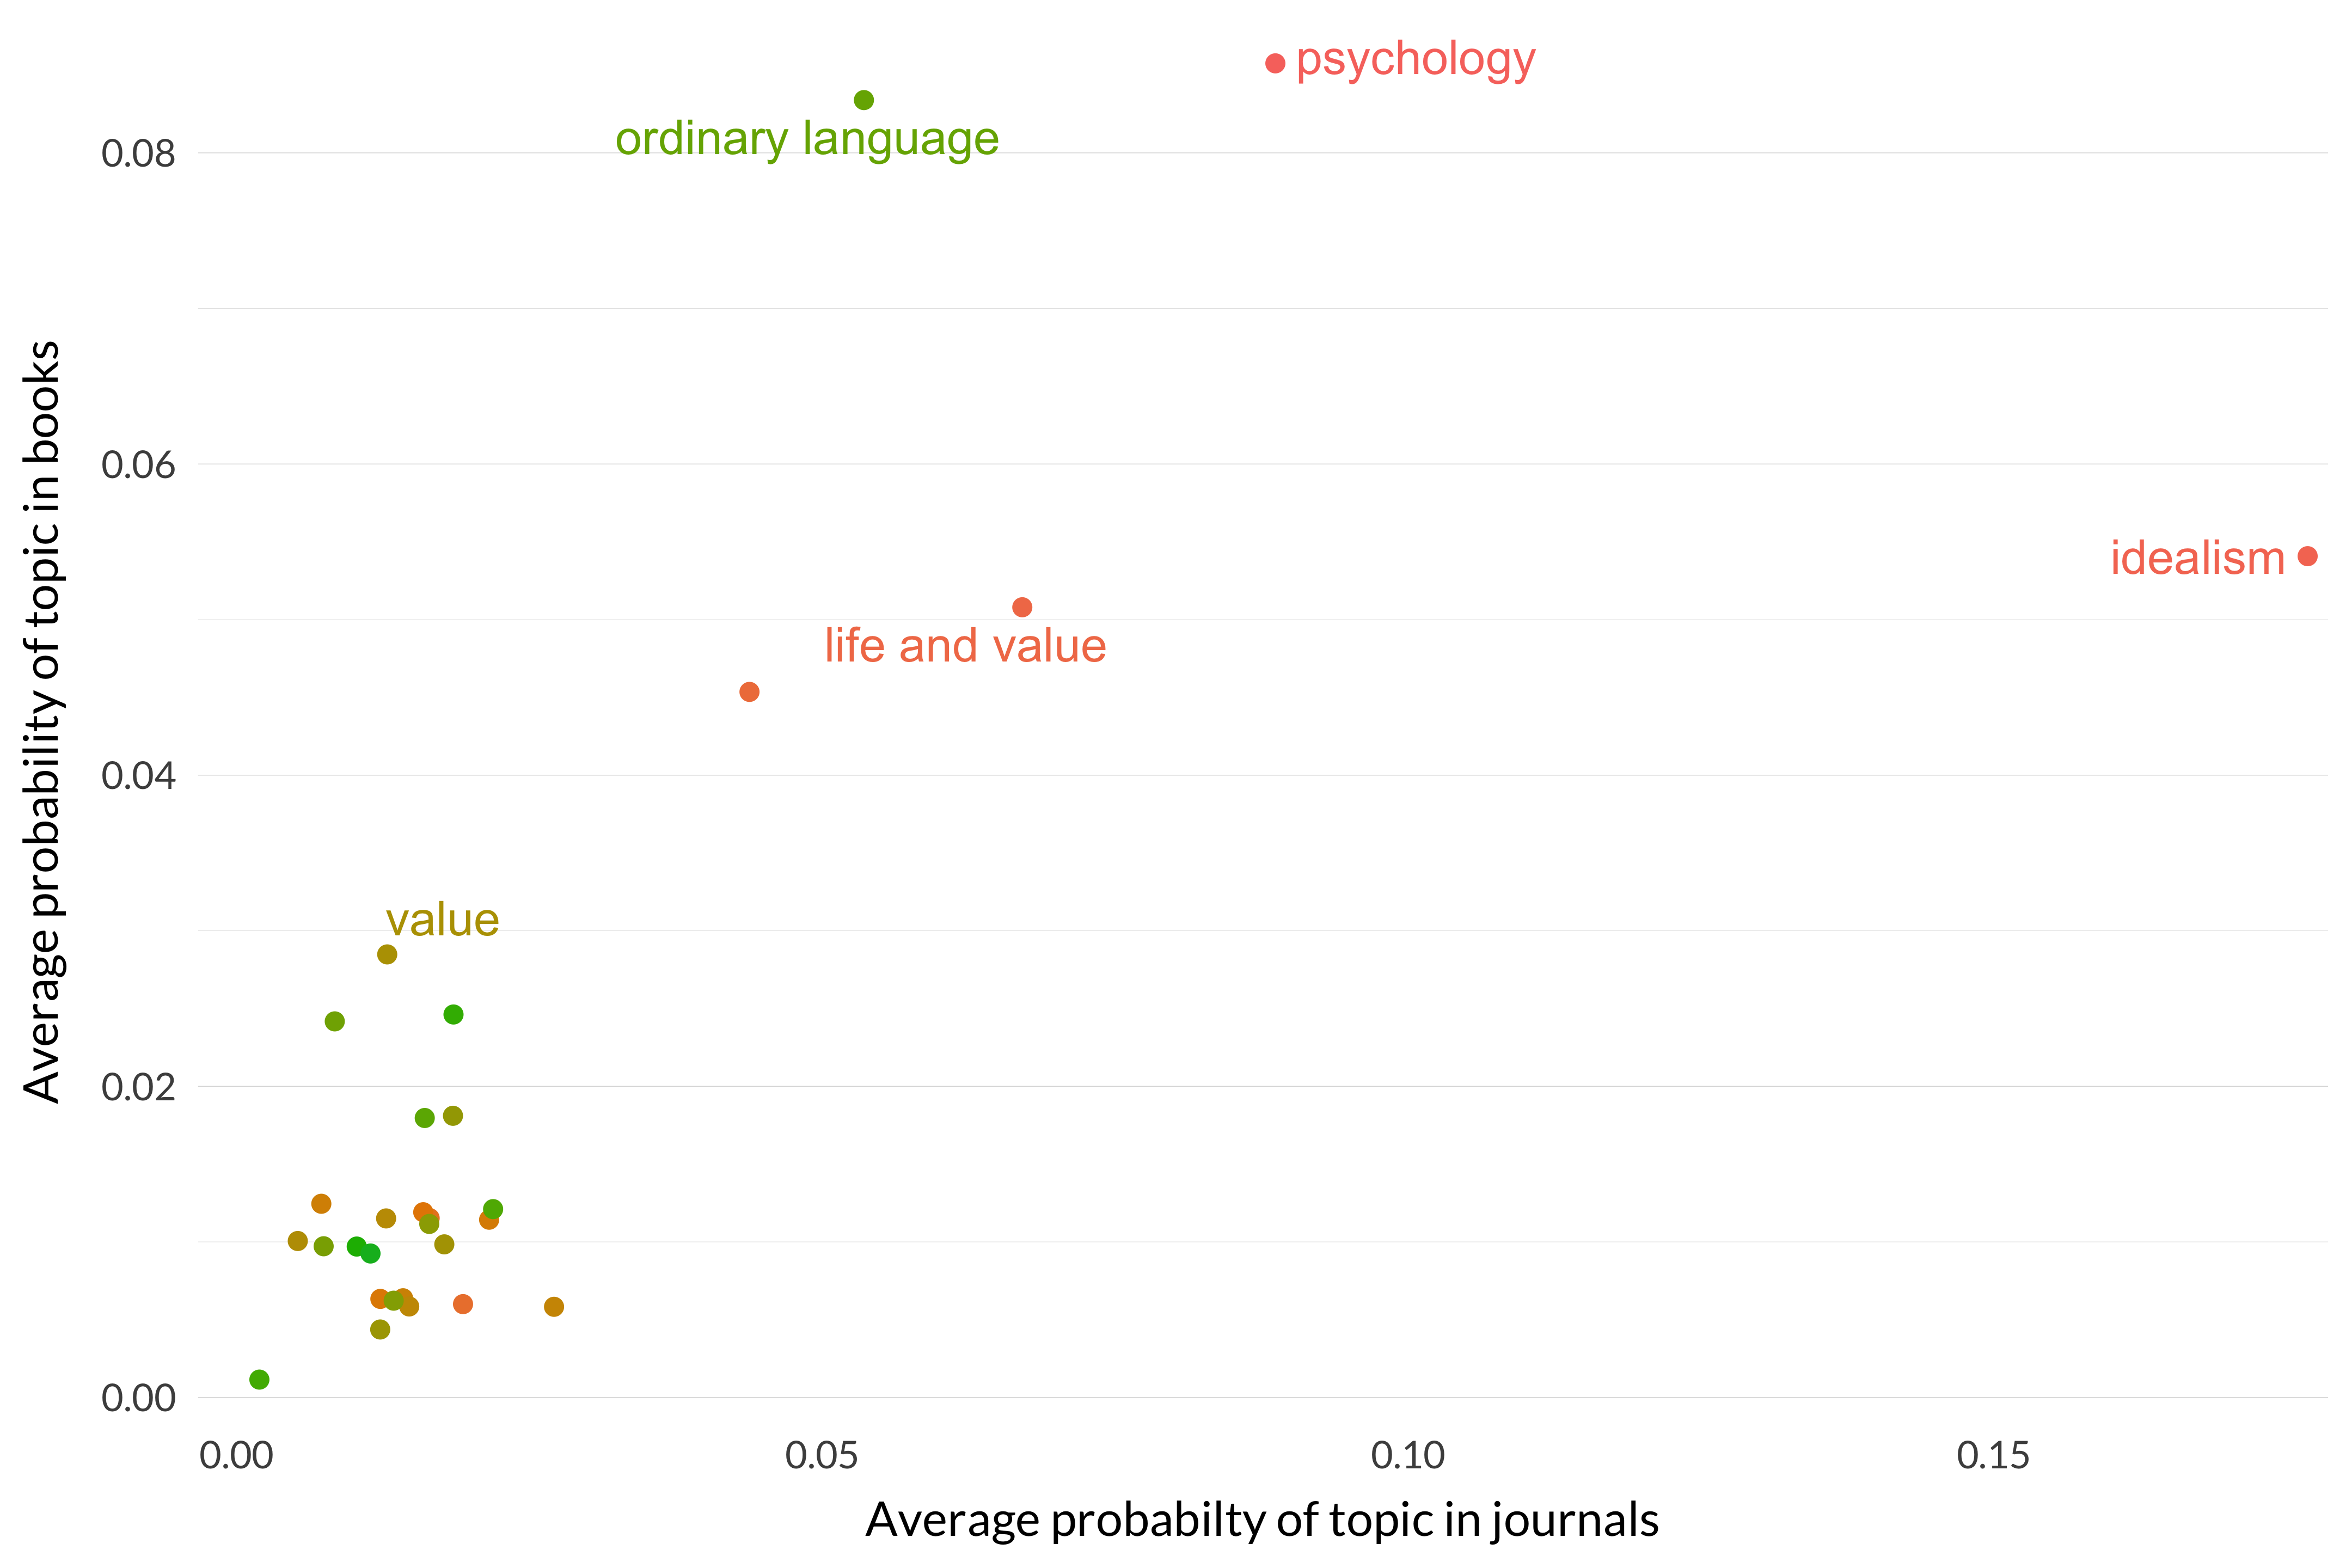 A scatterplot comparing the distribution of topics 1–30 in journal articles up to 1925 and in the books being discussed. Most topics are present to roughly the same amount, but idealism is much less prevalent in the books, and ordinary language philosophy is more prevalent.